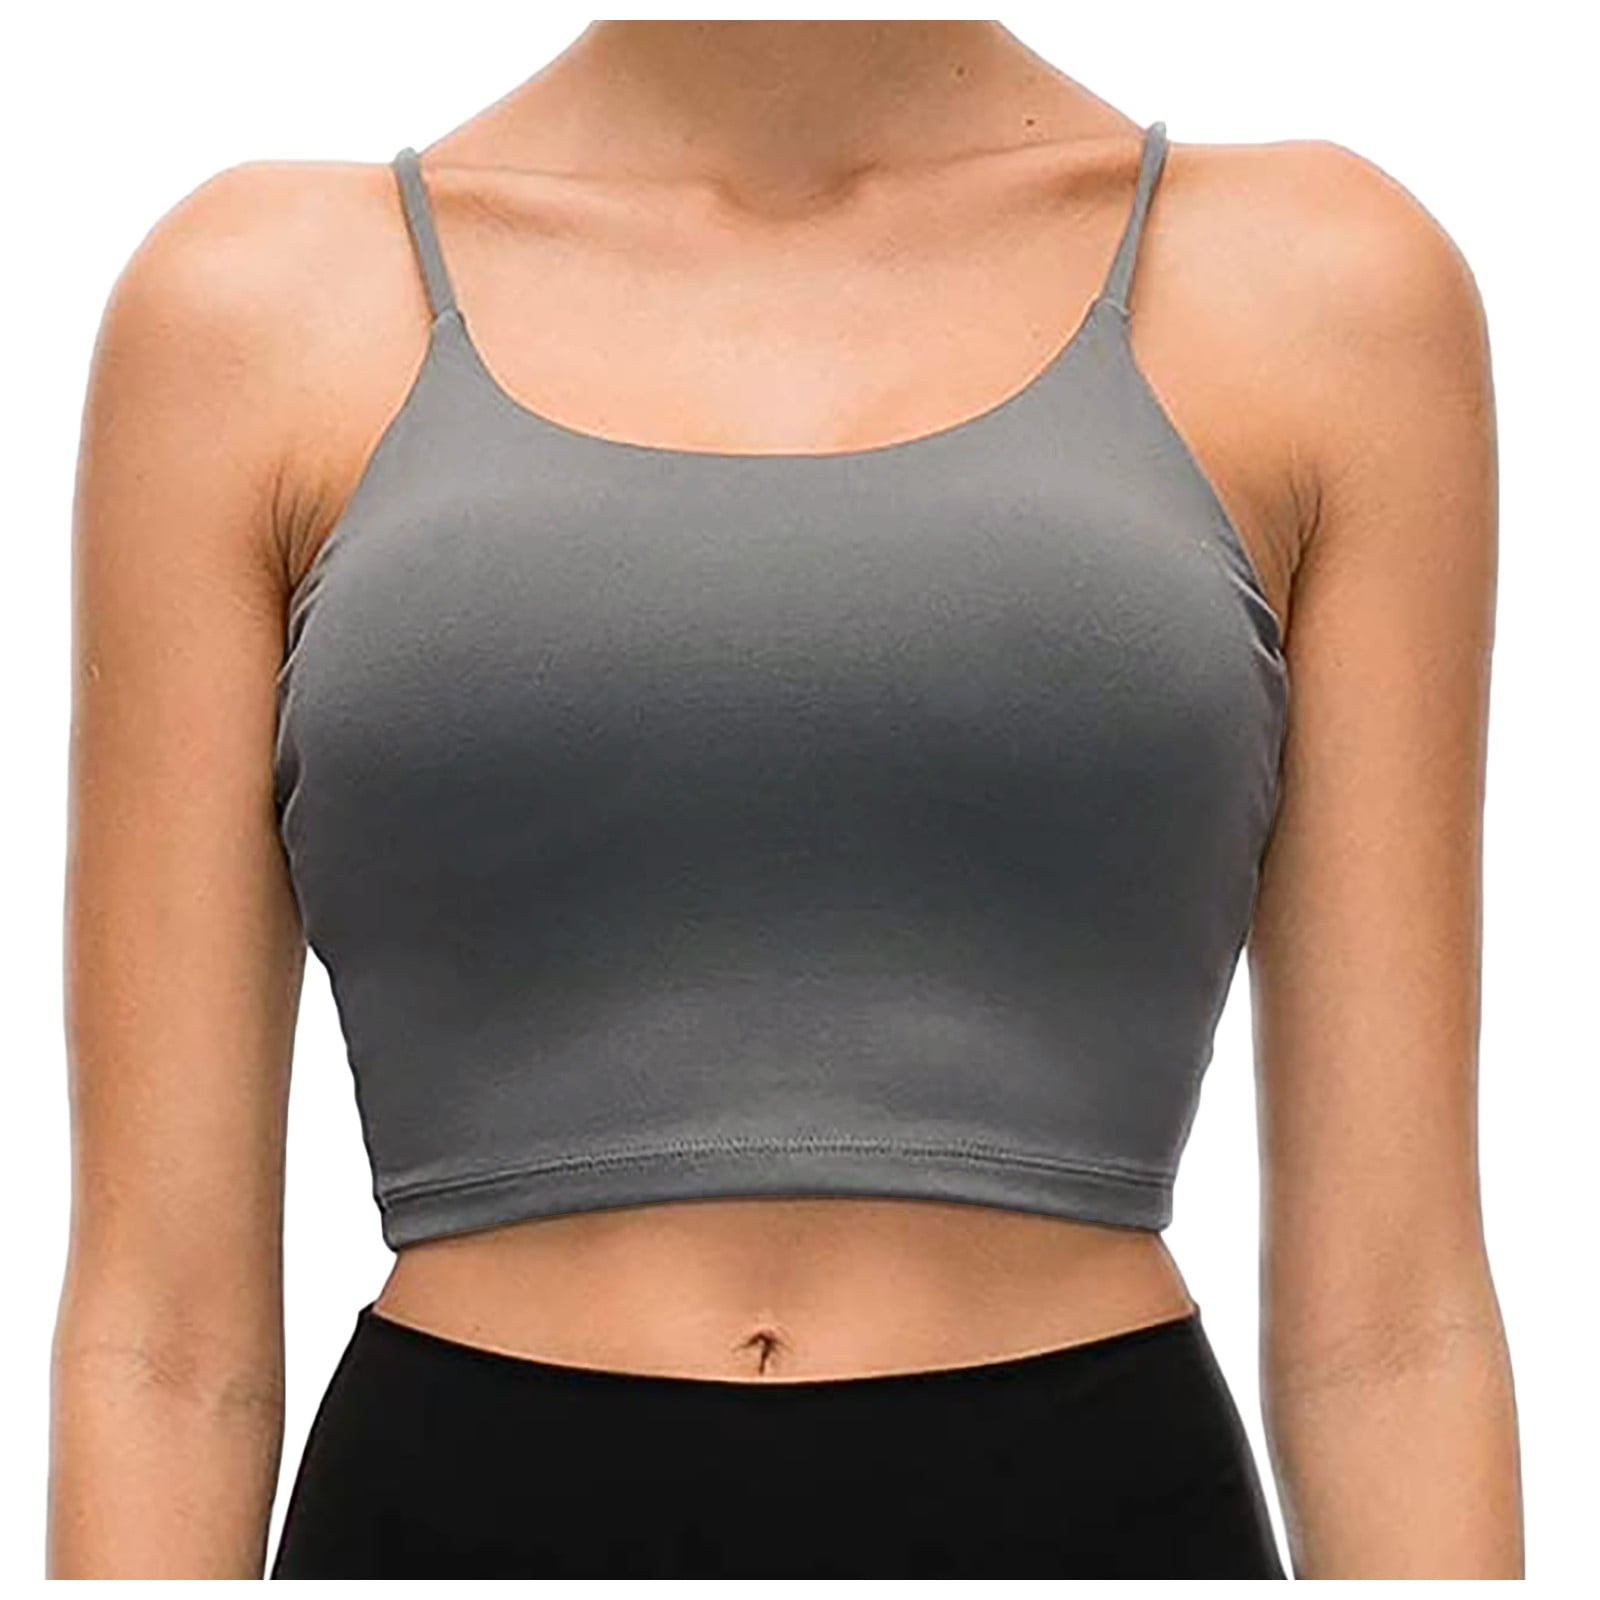 Outdoor Sport Crop Tops for Women Sleeveless Casual Vest Ladies Chest pad Movement Short Tank Tops 